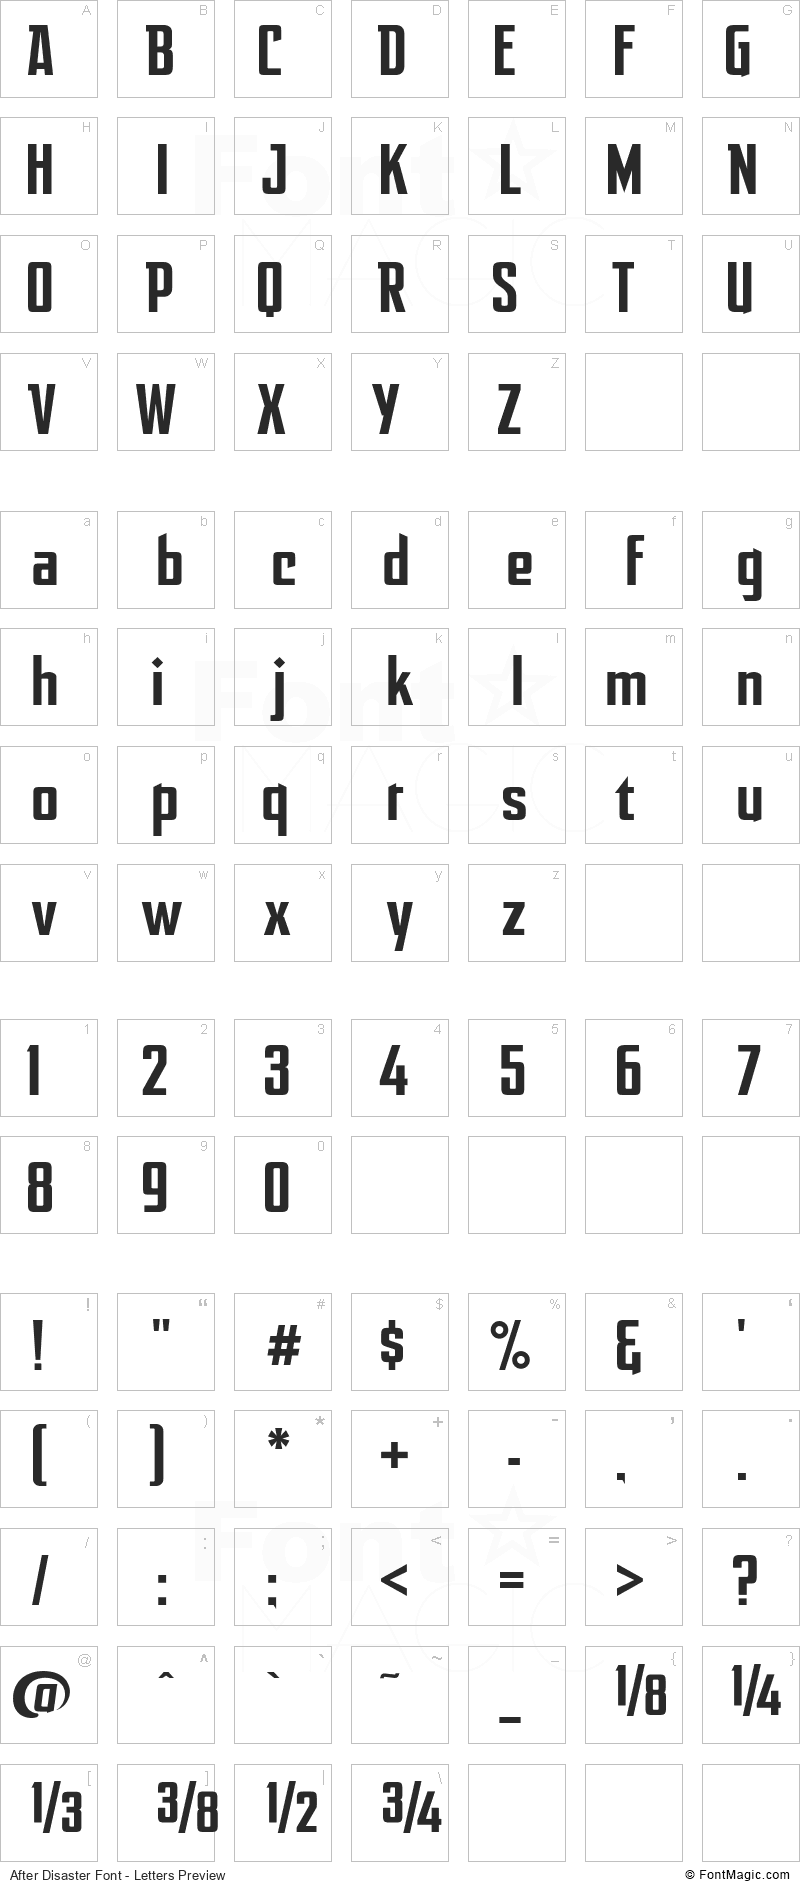 After Disaster Font - All Latters Preview Chart